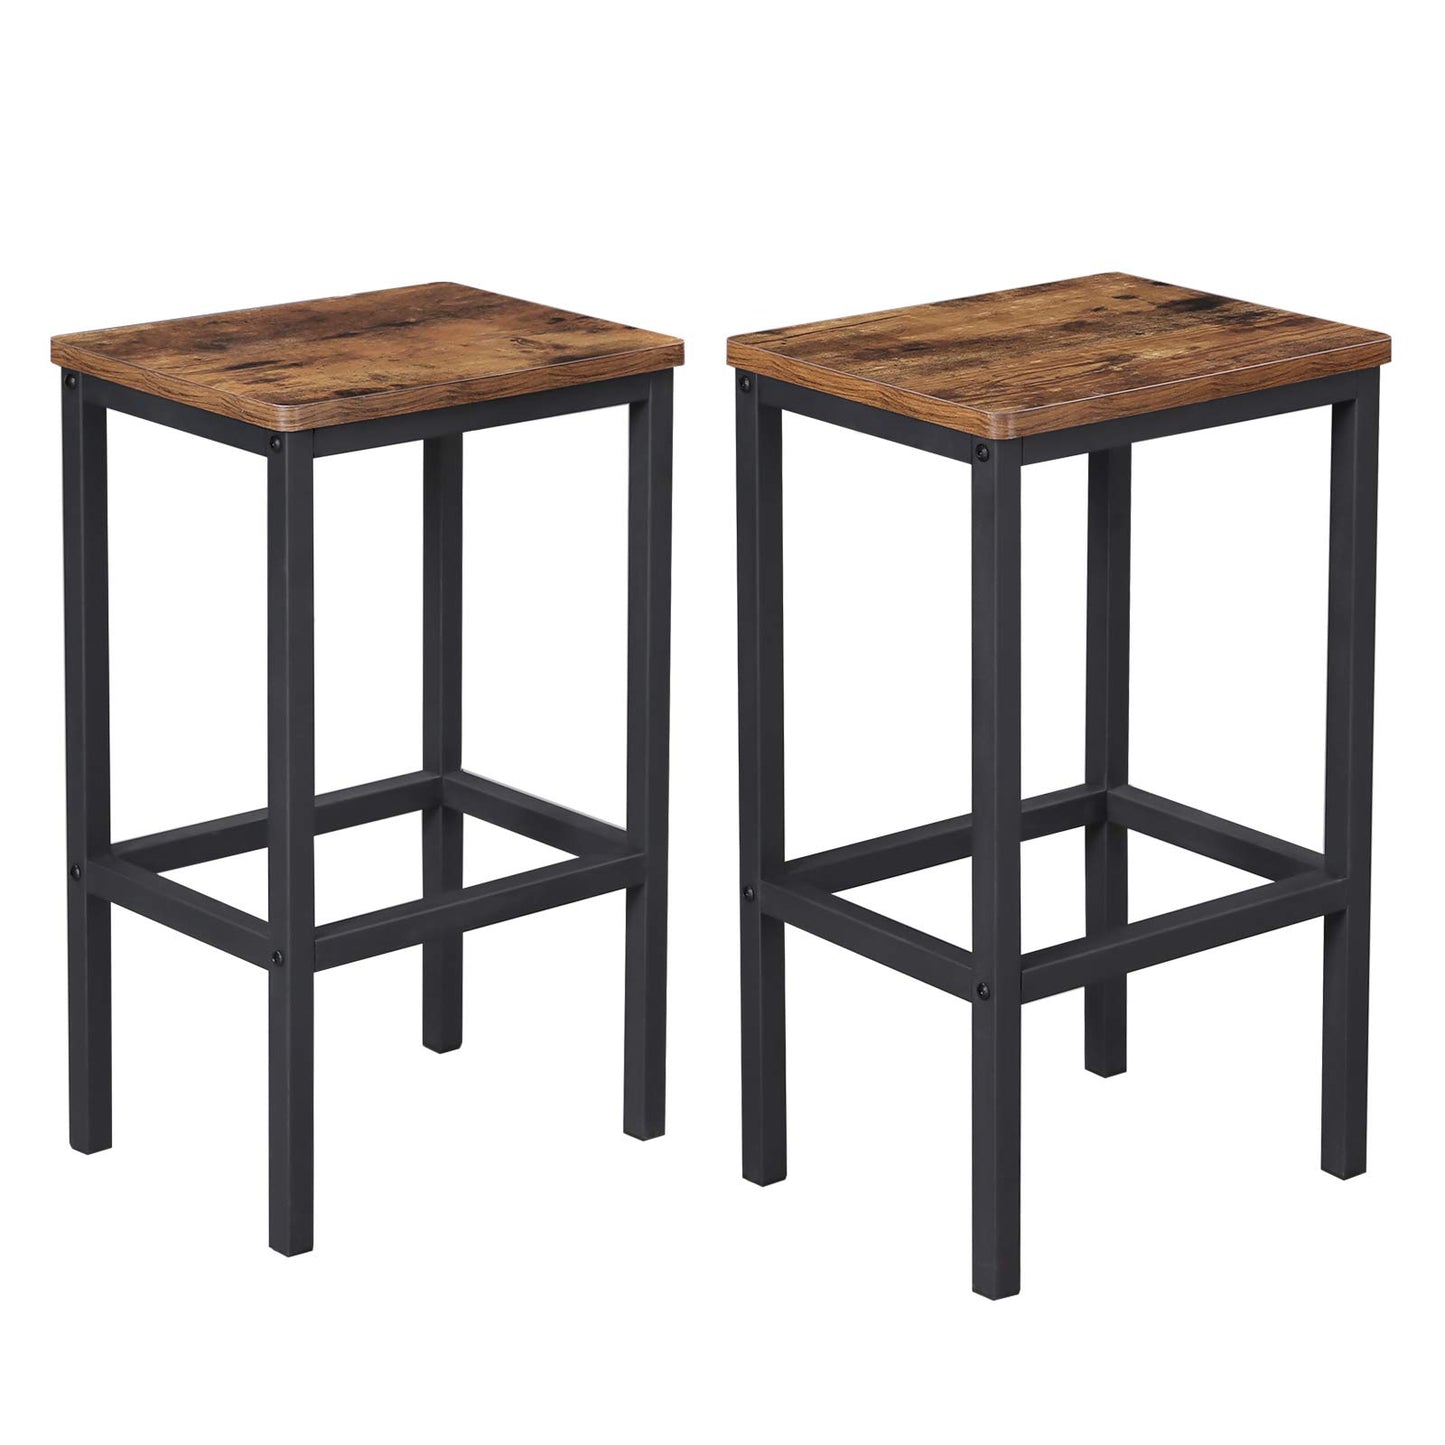 VASAGLE Bar Stools, Set of 2 Bar Chairs, Kitchen Breakfast Bar Stools with Footrest, Industrial in Living Room, Party Room, Rustic Brown and Black